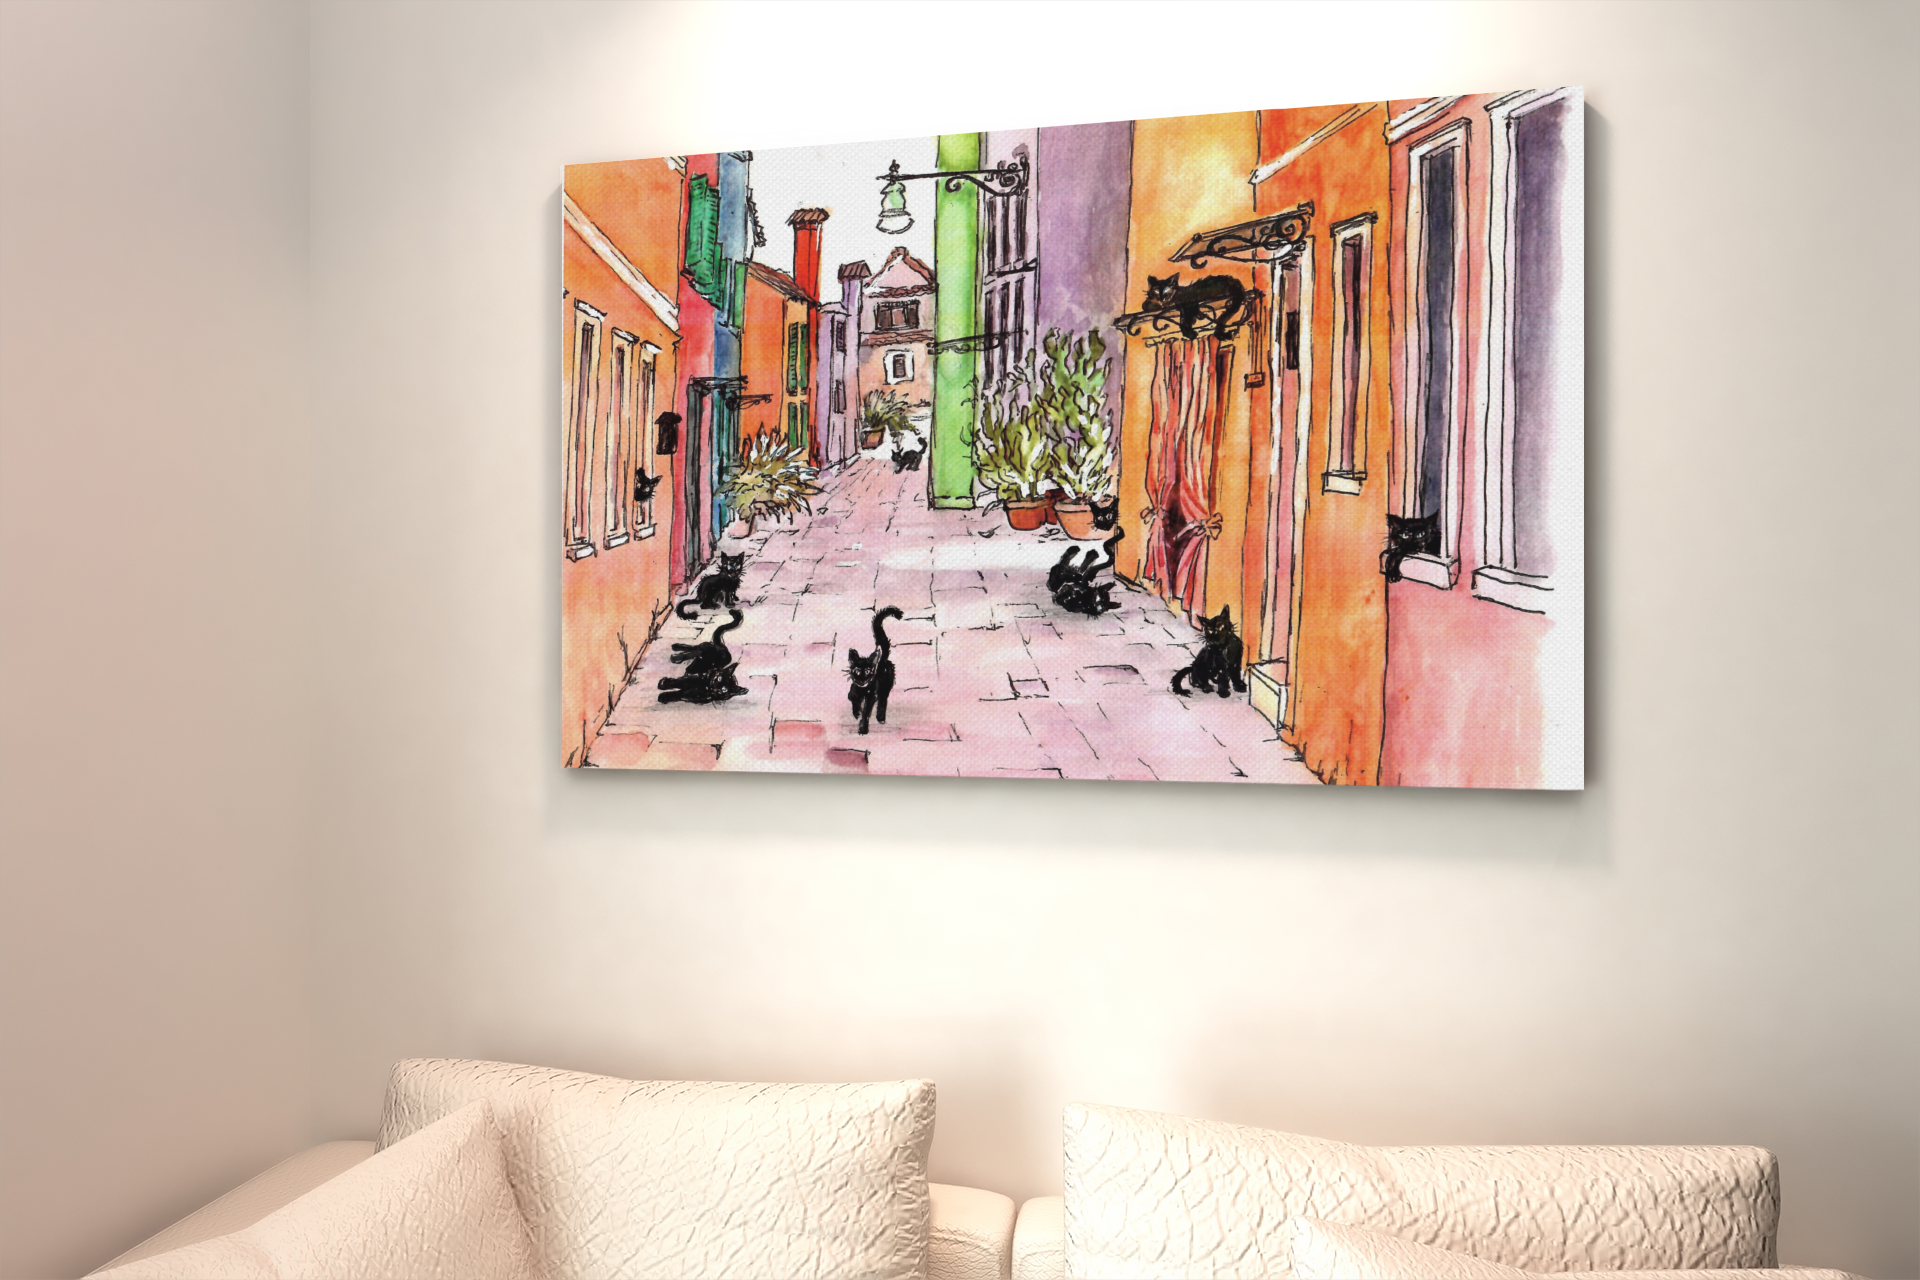 Cats Lounging In A Colorful European Cobblestone Alley